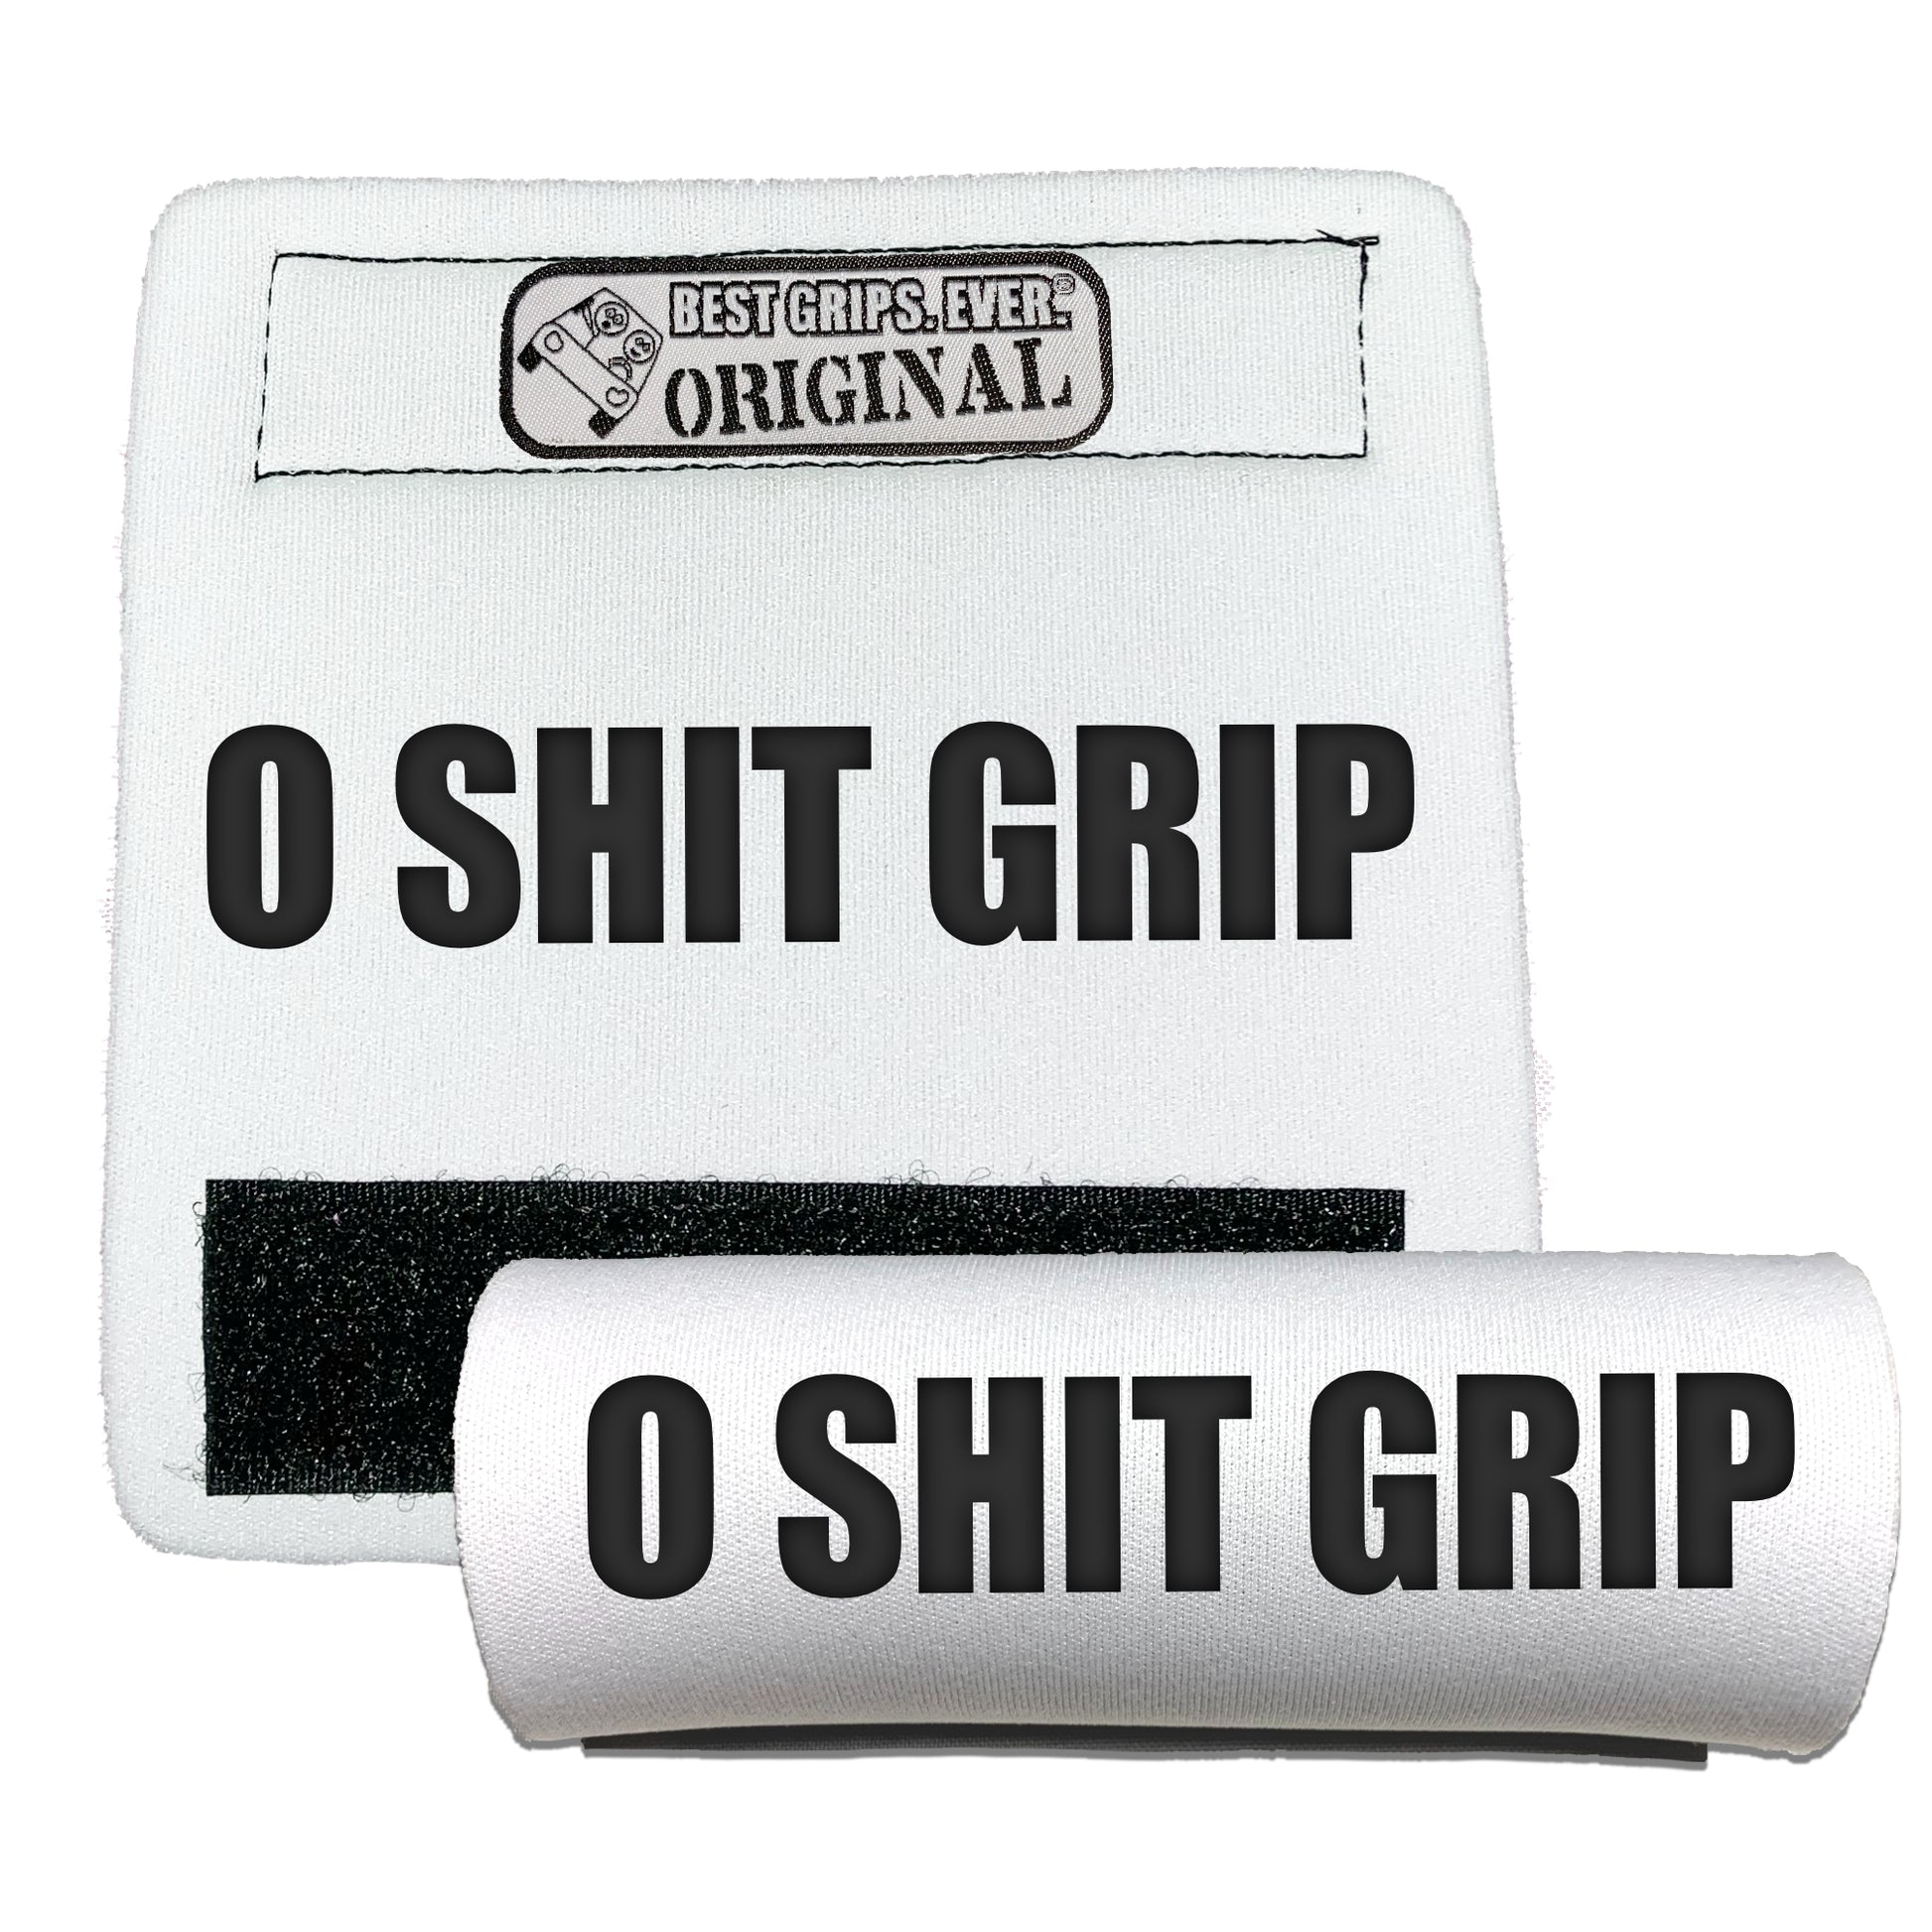 The O Shit Grip® - BEST GRIPS. EVER.®